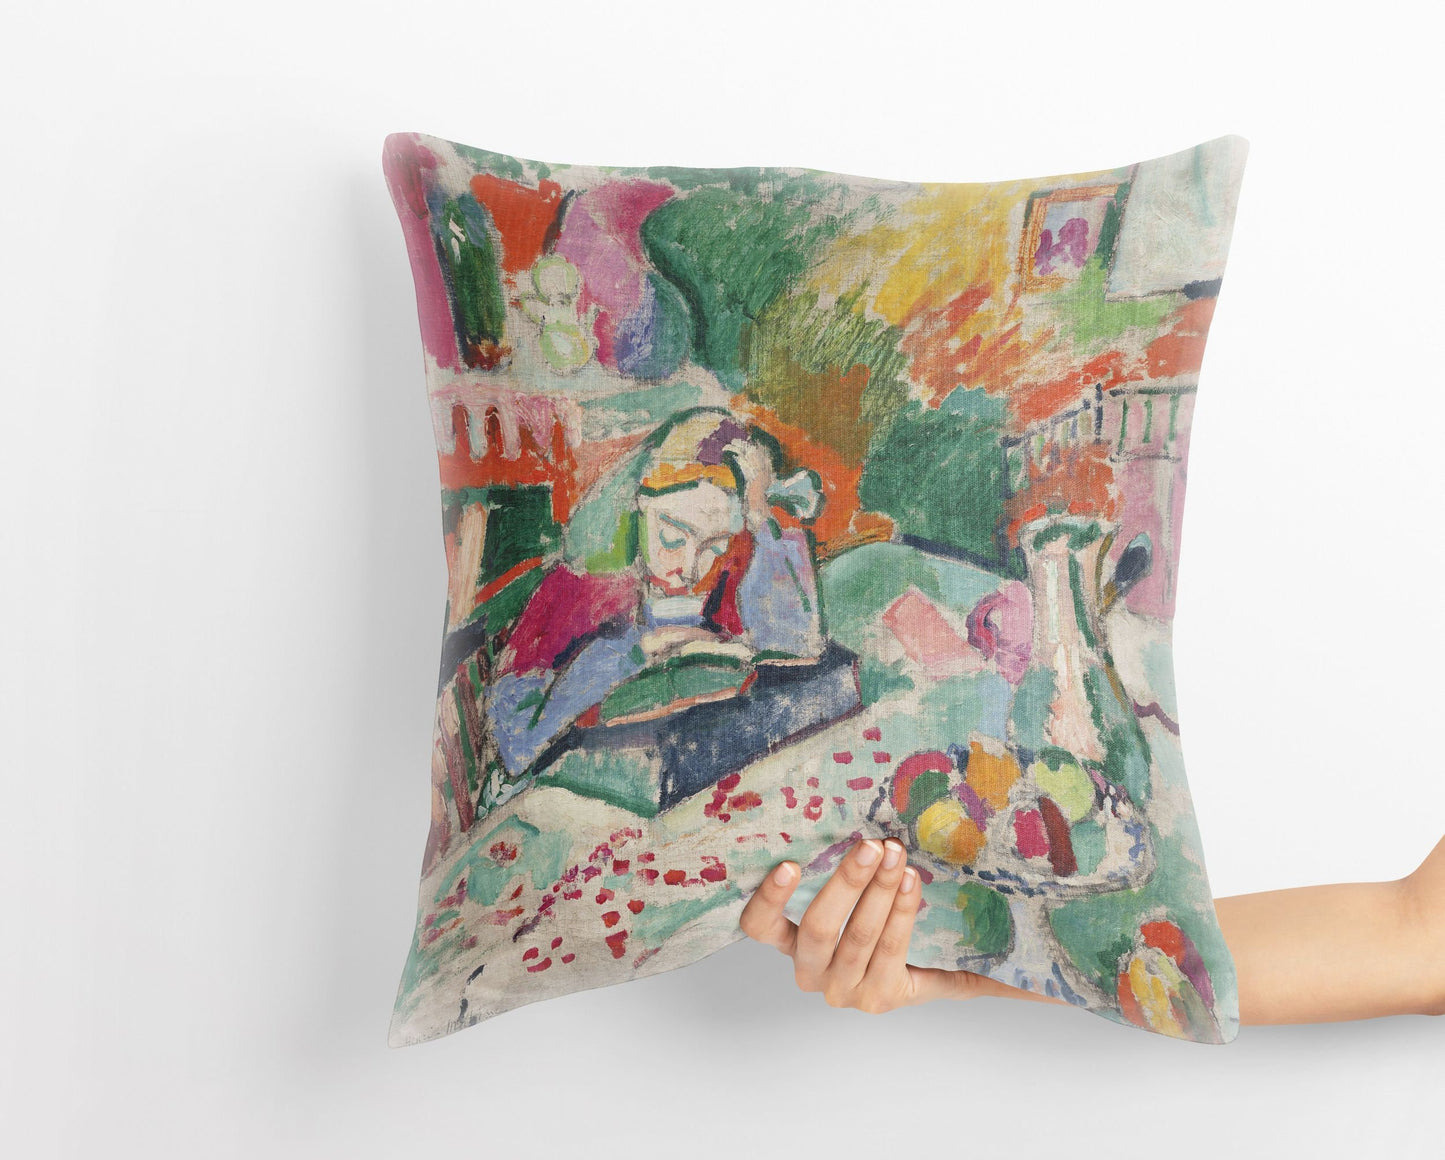 Henri Matisse Famous Painting, Decorative Pillow, Abstract Throw Pillow, Fauvist Pillow, 18 X 18 Pillow Covers, Pillow Cases For Kids